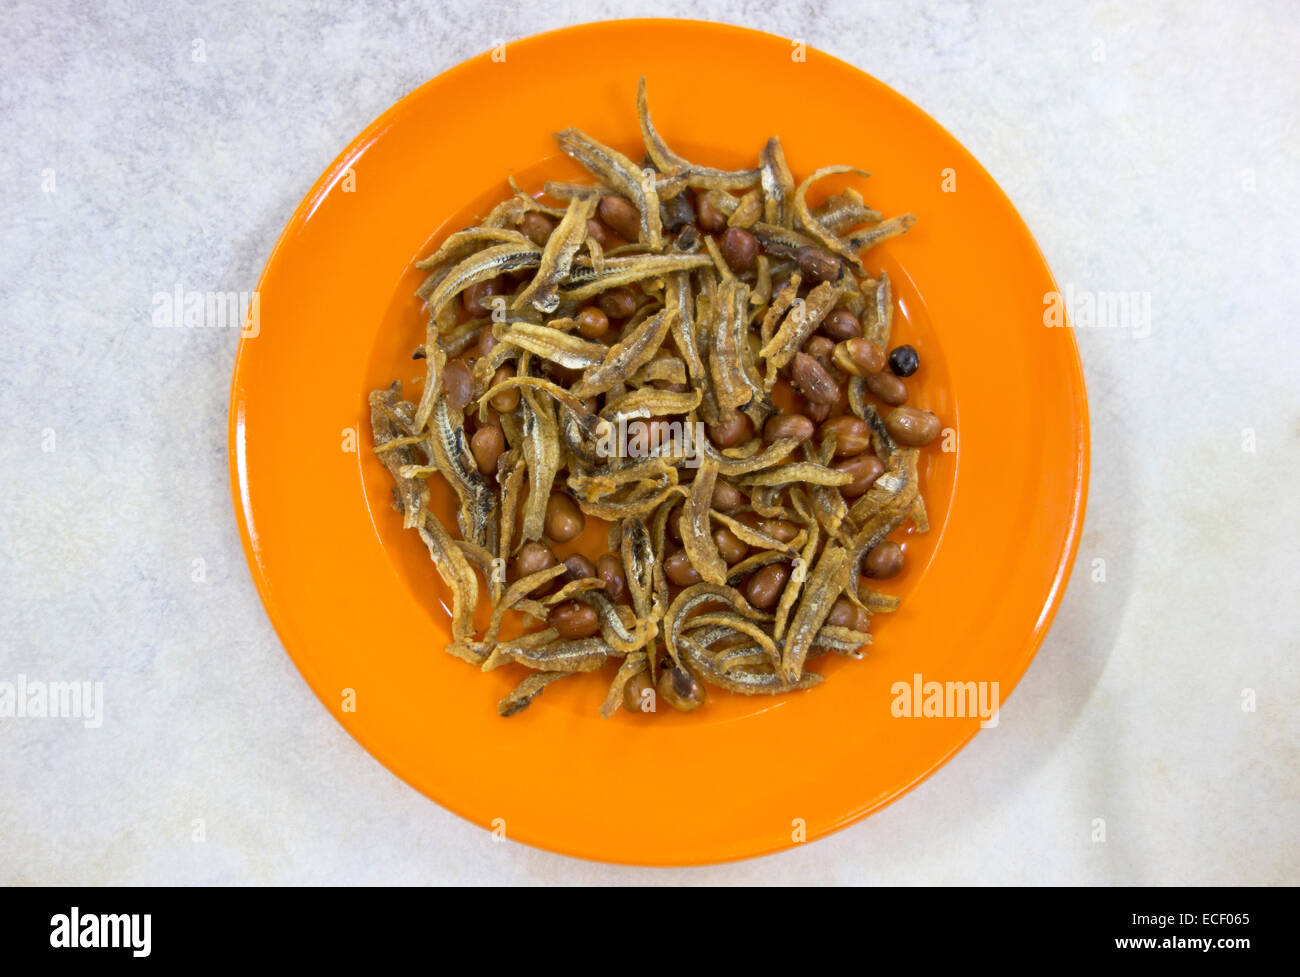 Dried and fried small Anchovy fish with peanuts Stock Photo